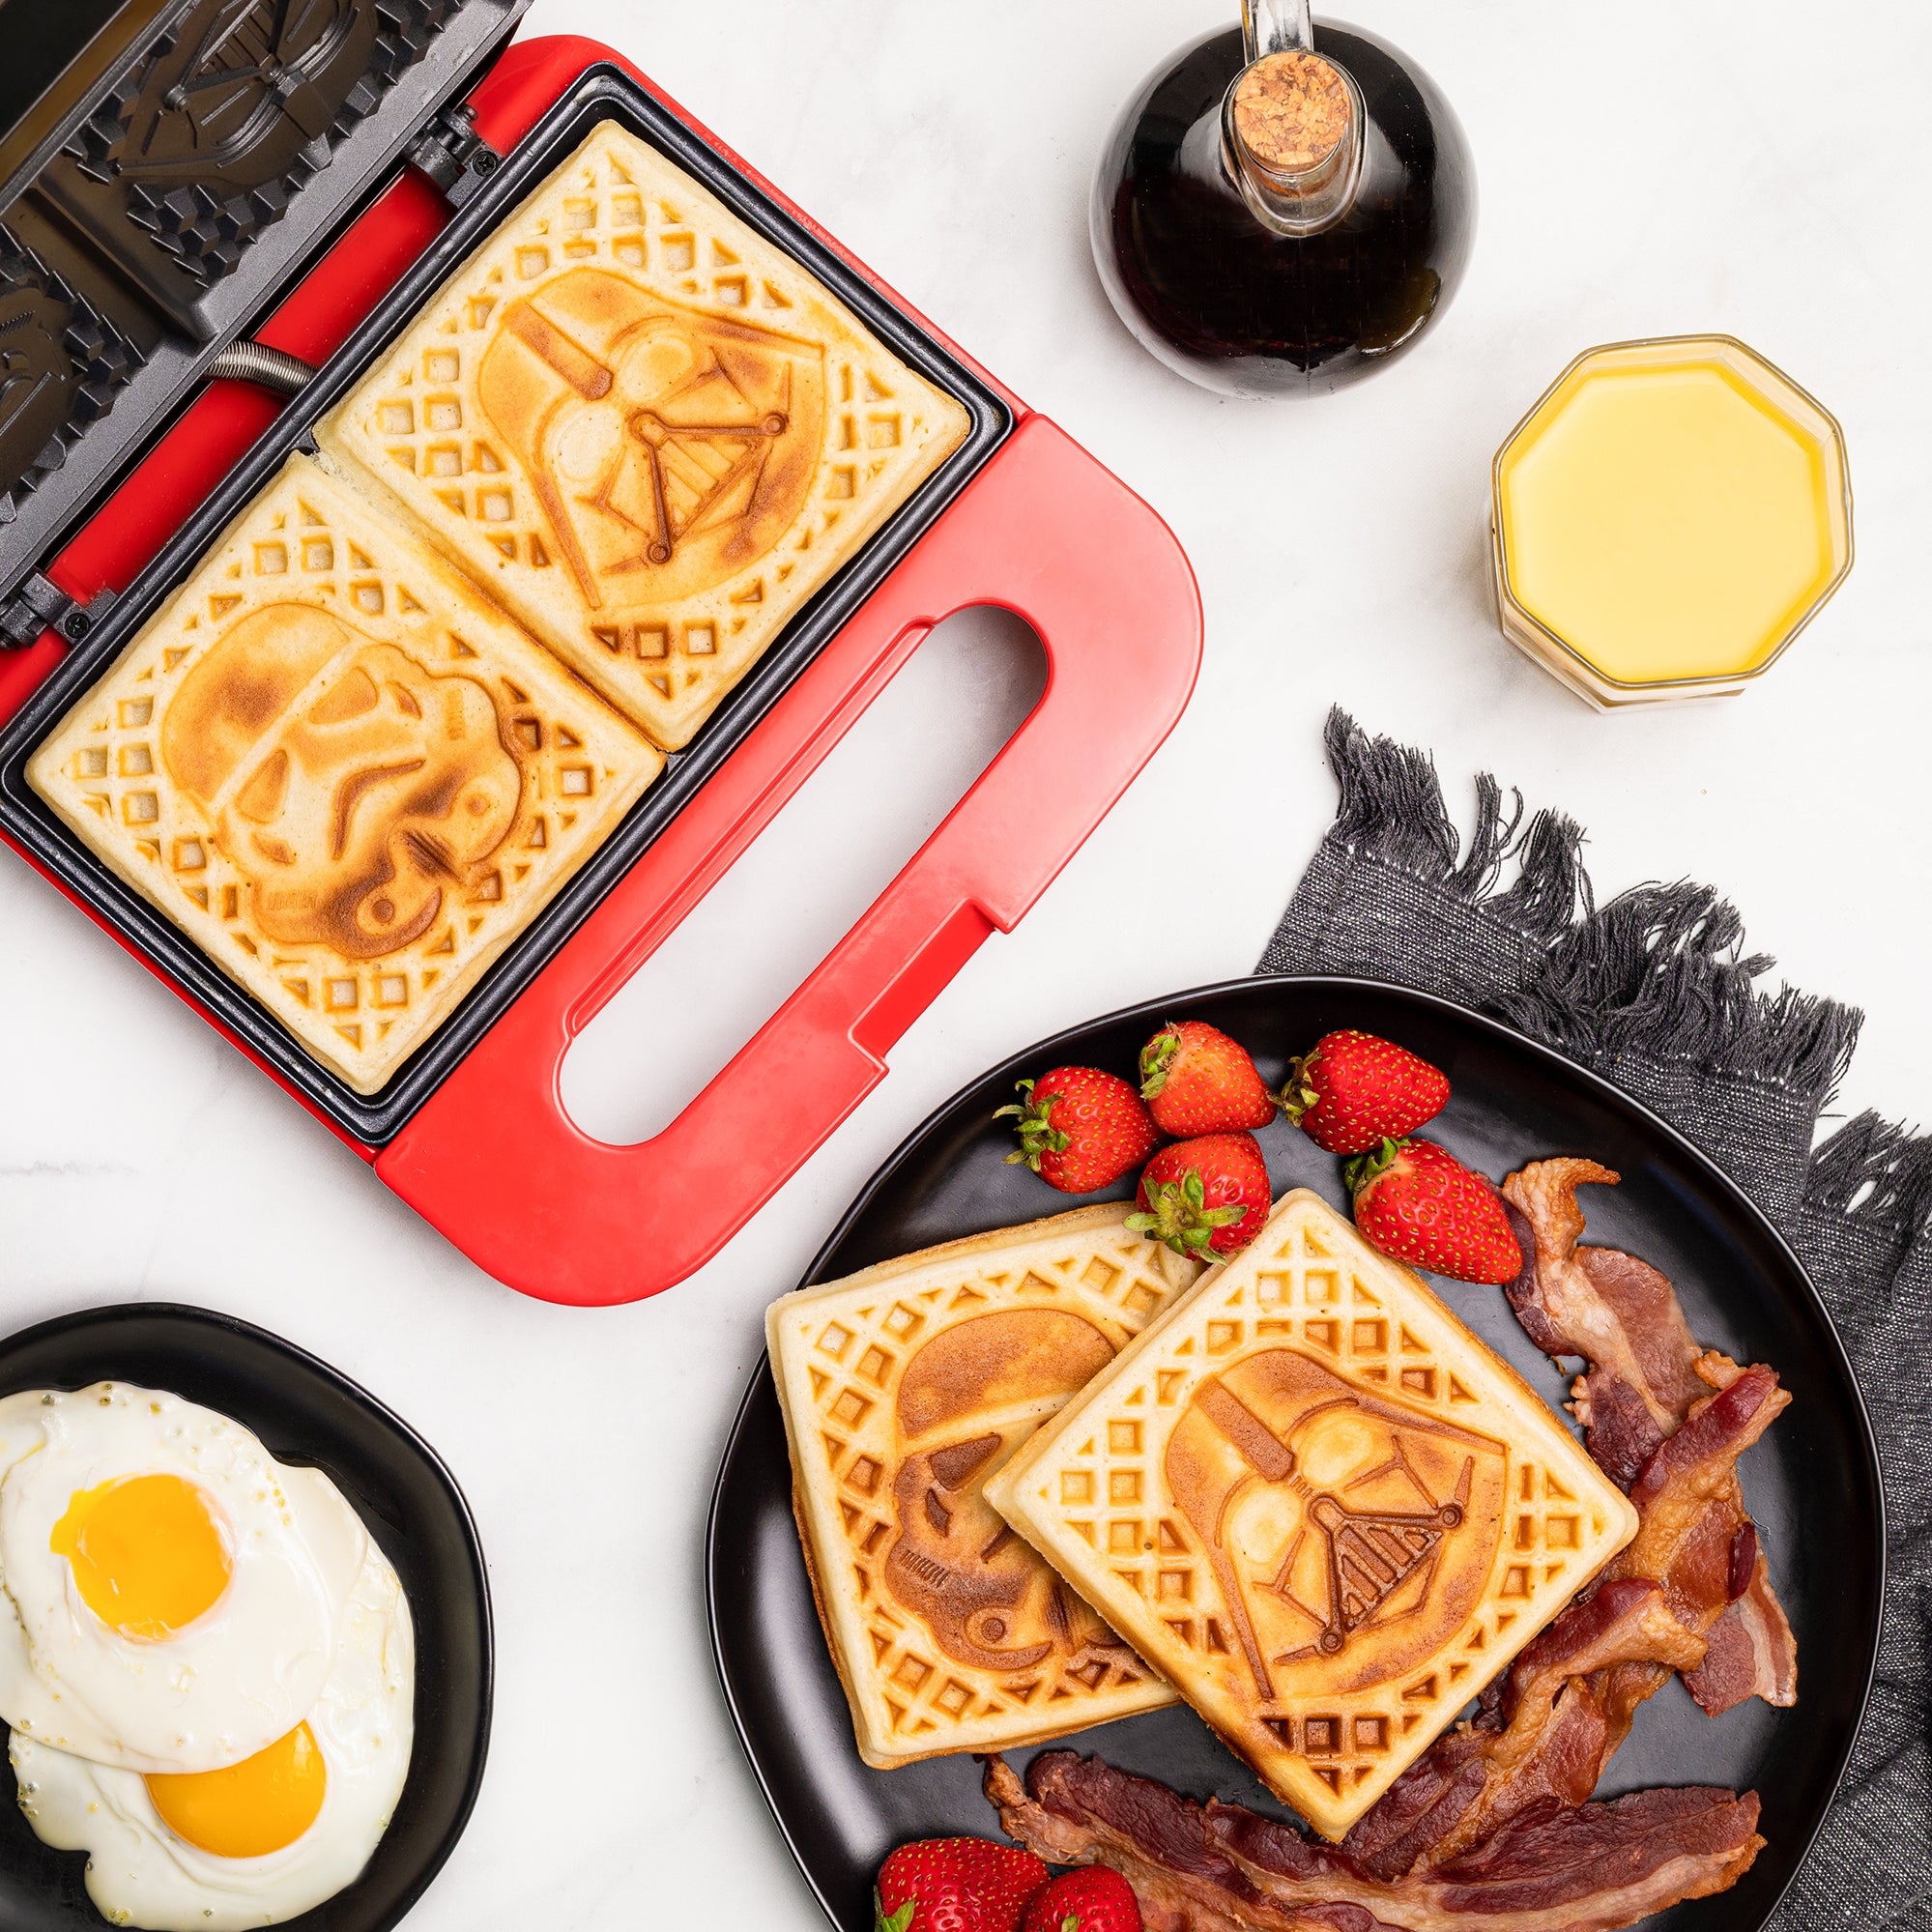 Star Wars: The Mandalorian's Baby Yoda Is Now a Waffle Maker